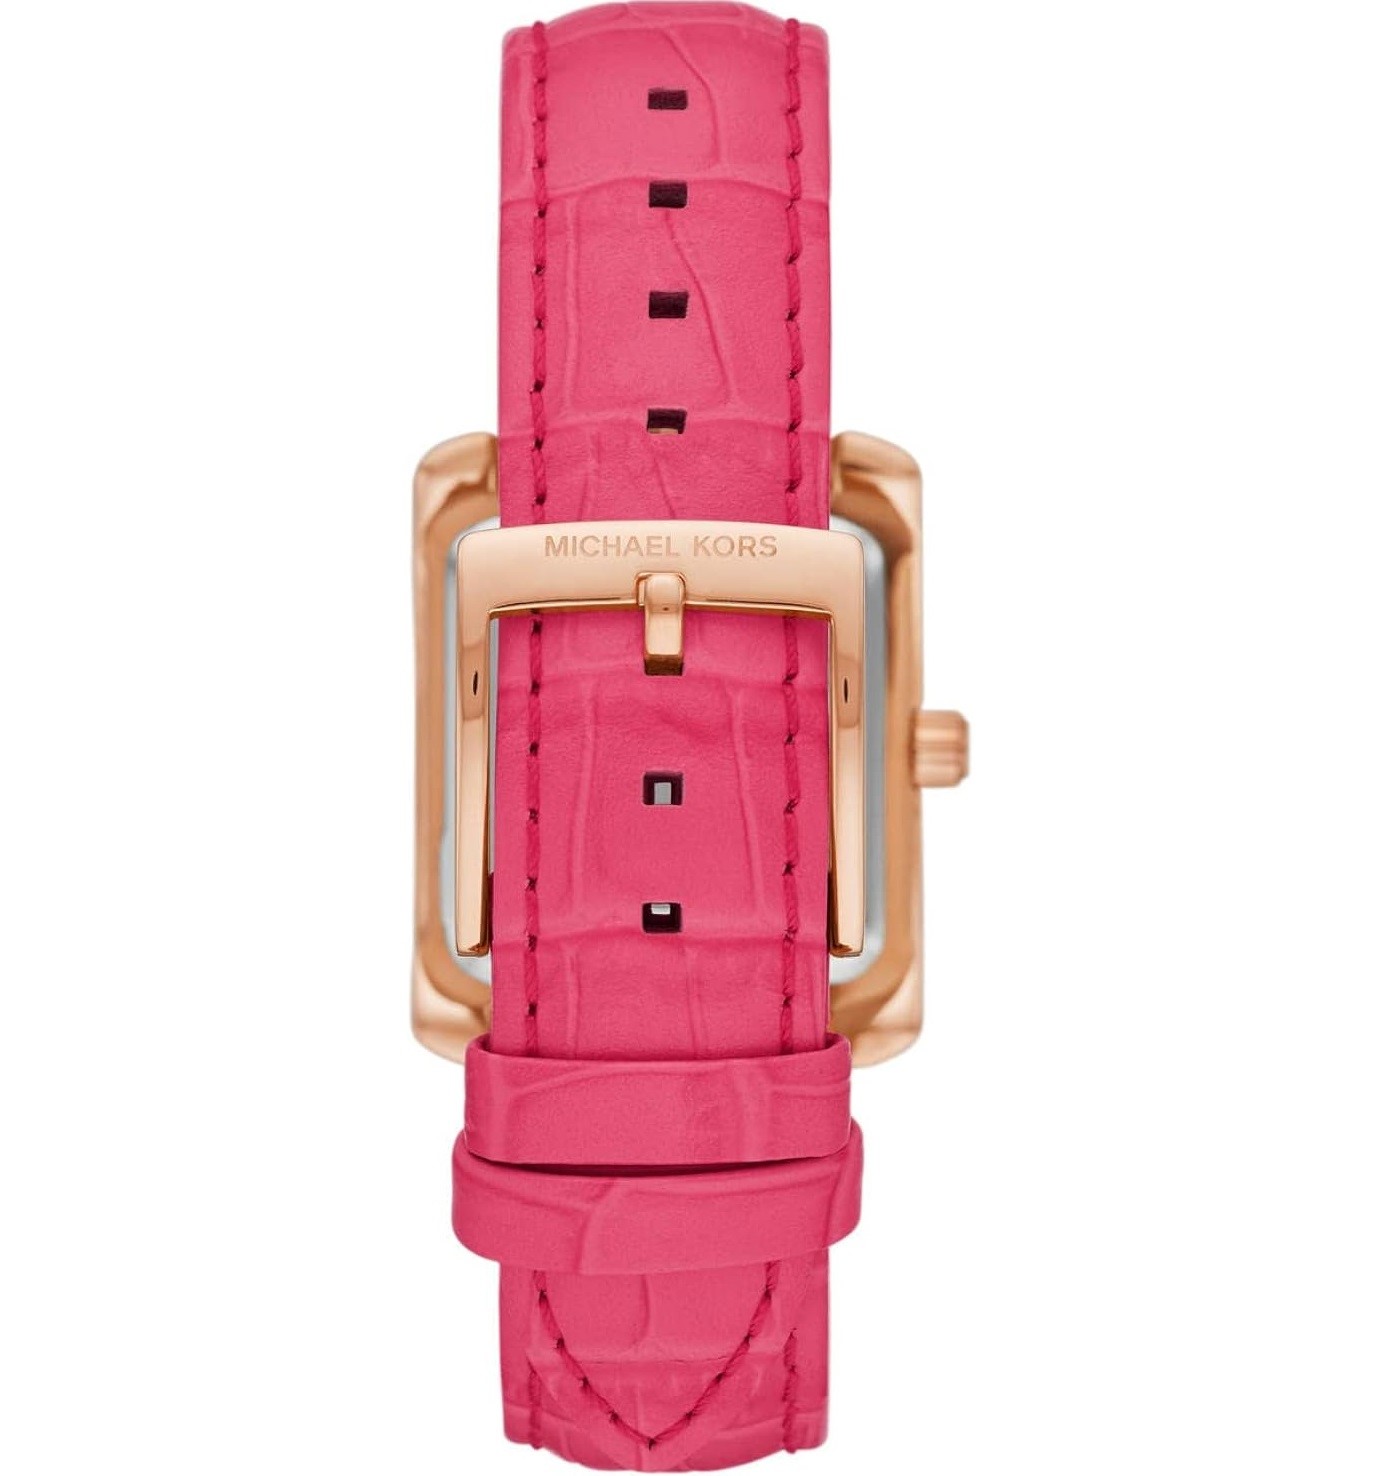 ĐỒNG HỒ MK NỮ MICHAEL KORS EMERY PAVÉ ROSE GOLD-TONE AND CROCODILE EMBOSSED LEATHER WATCH MK2984 3